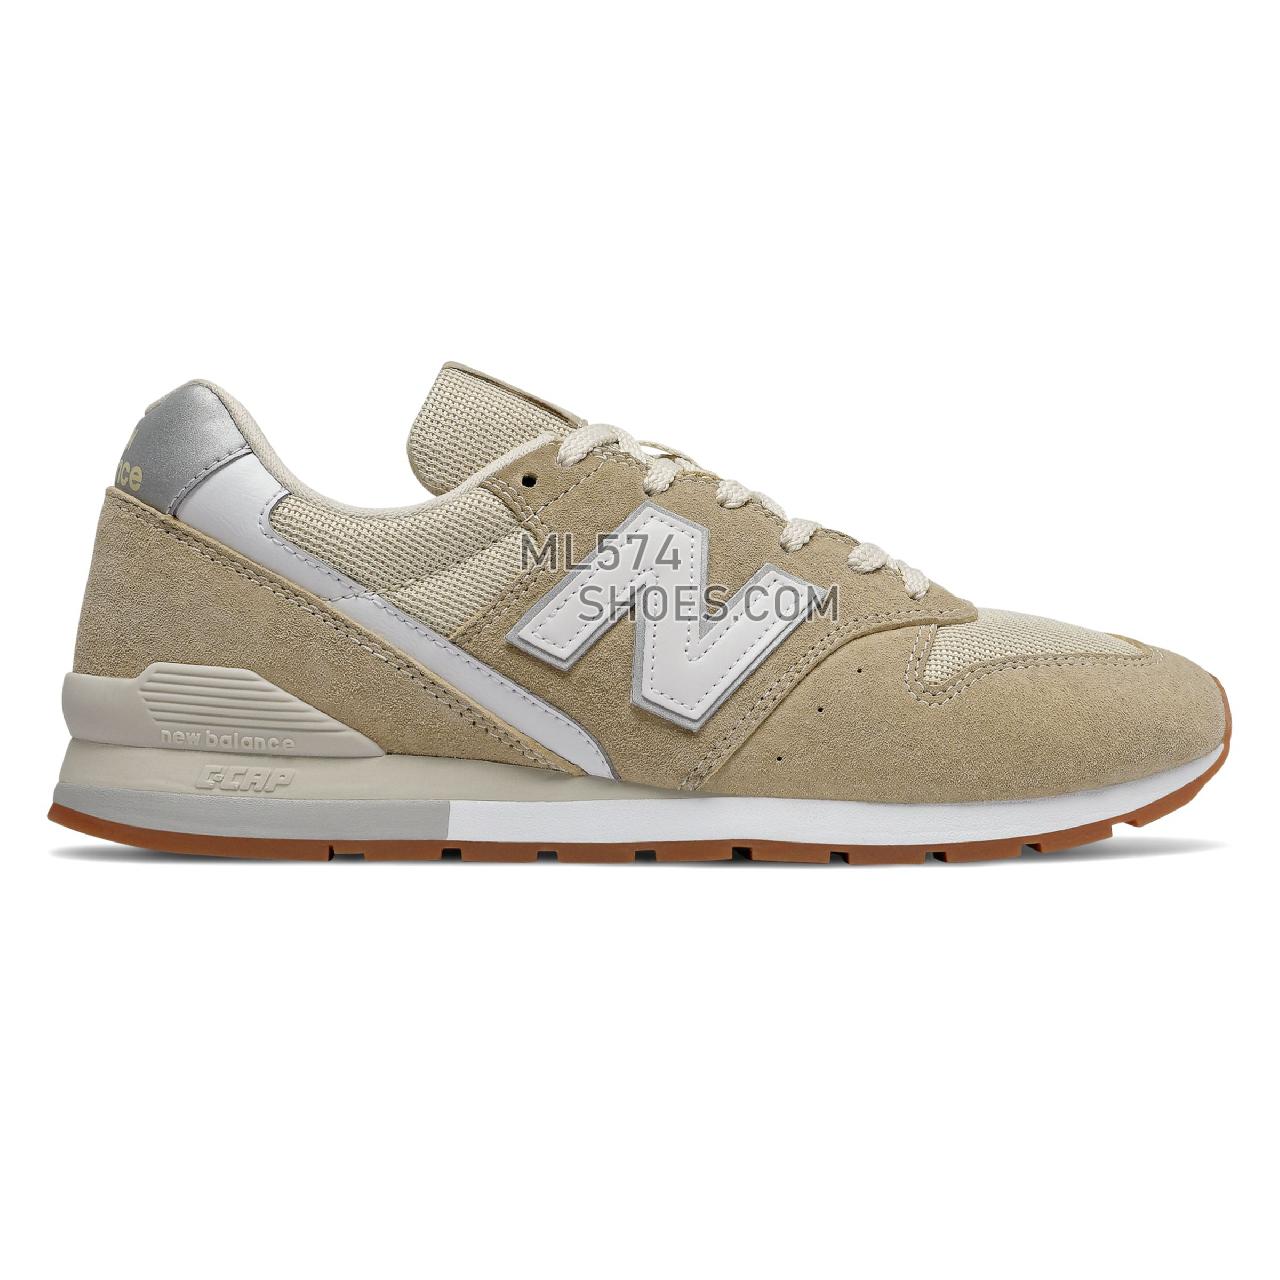 New Balance 996 - Men's 996 Classic - Incense with Munsell White - CM996SMT